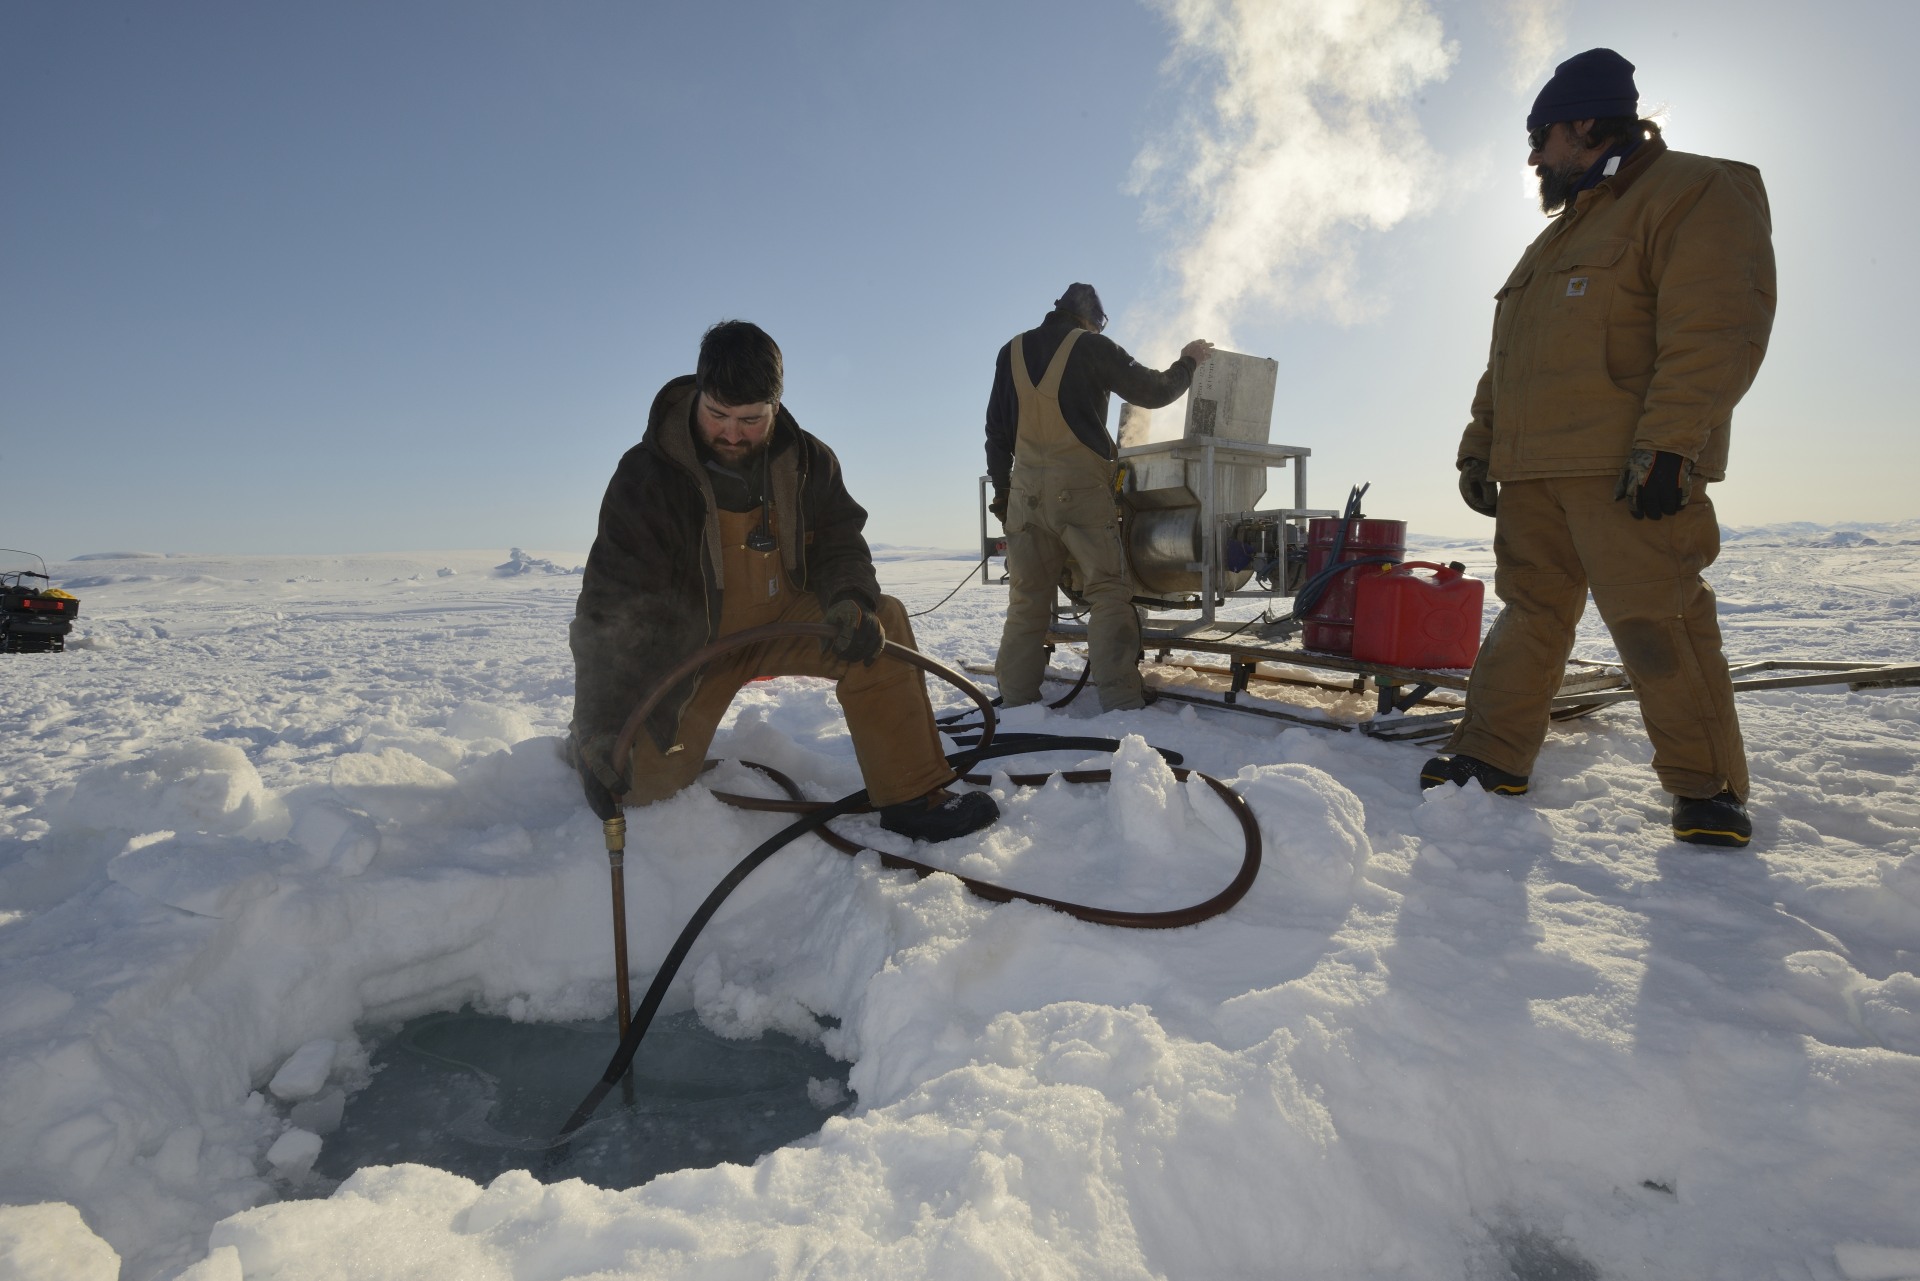 A hot water drill is sometimes used to drill larger holes in the ice.
Photo by Janice Lang, DRDC